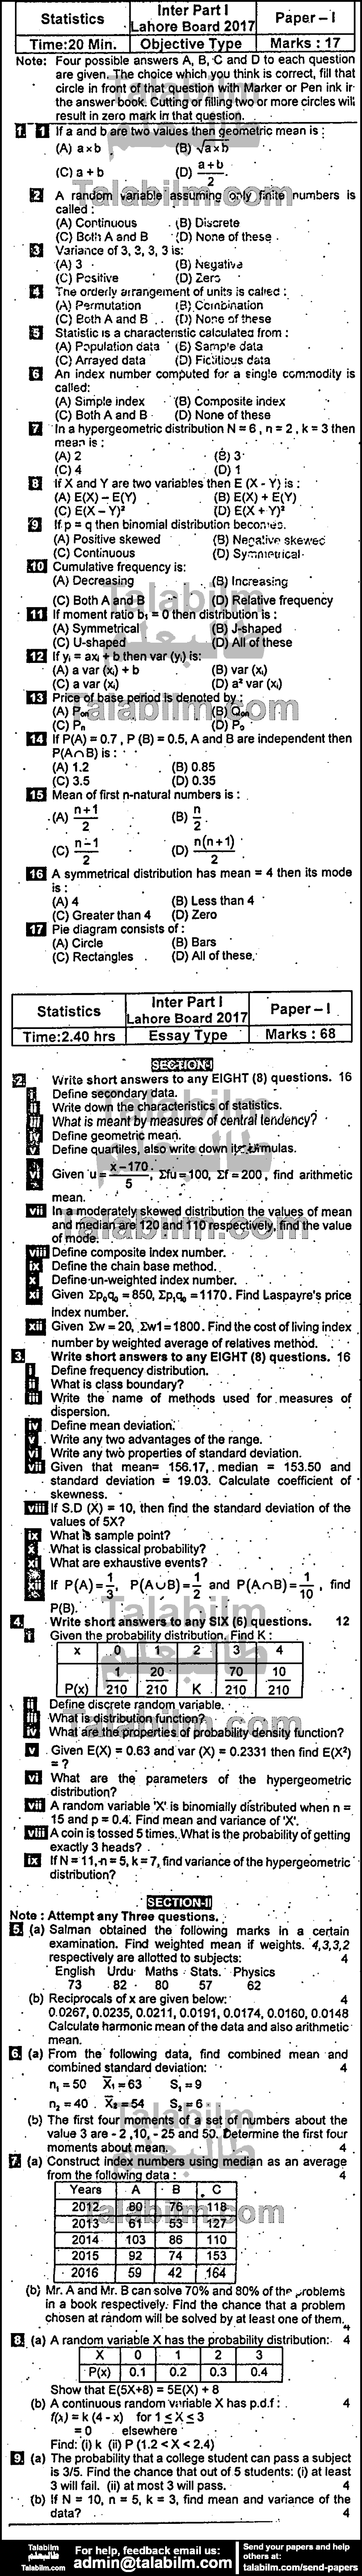 Statistics 0 past paper for Group-I 2017